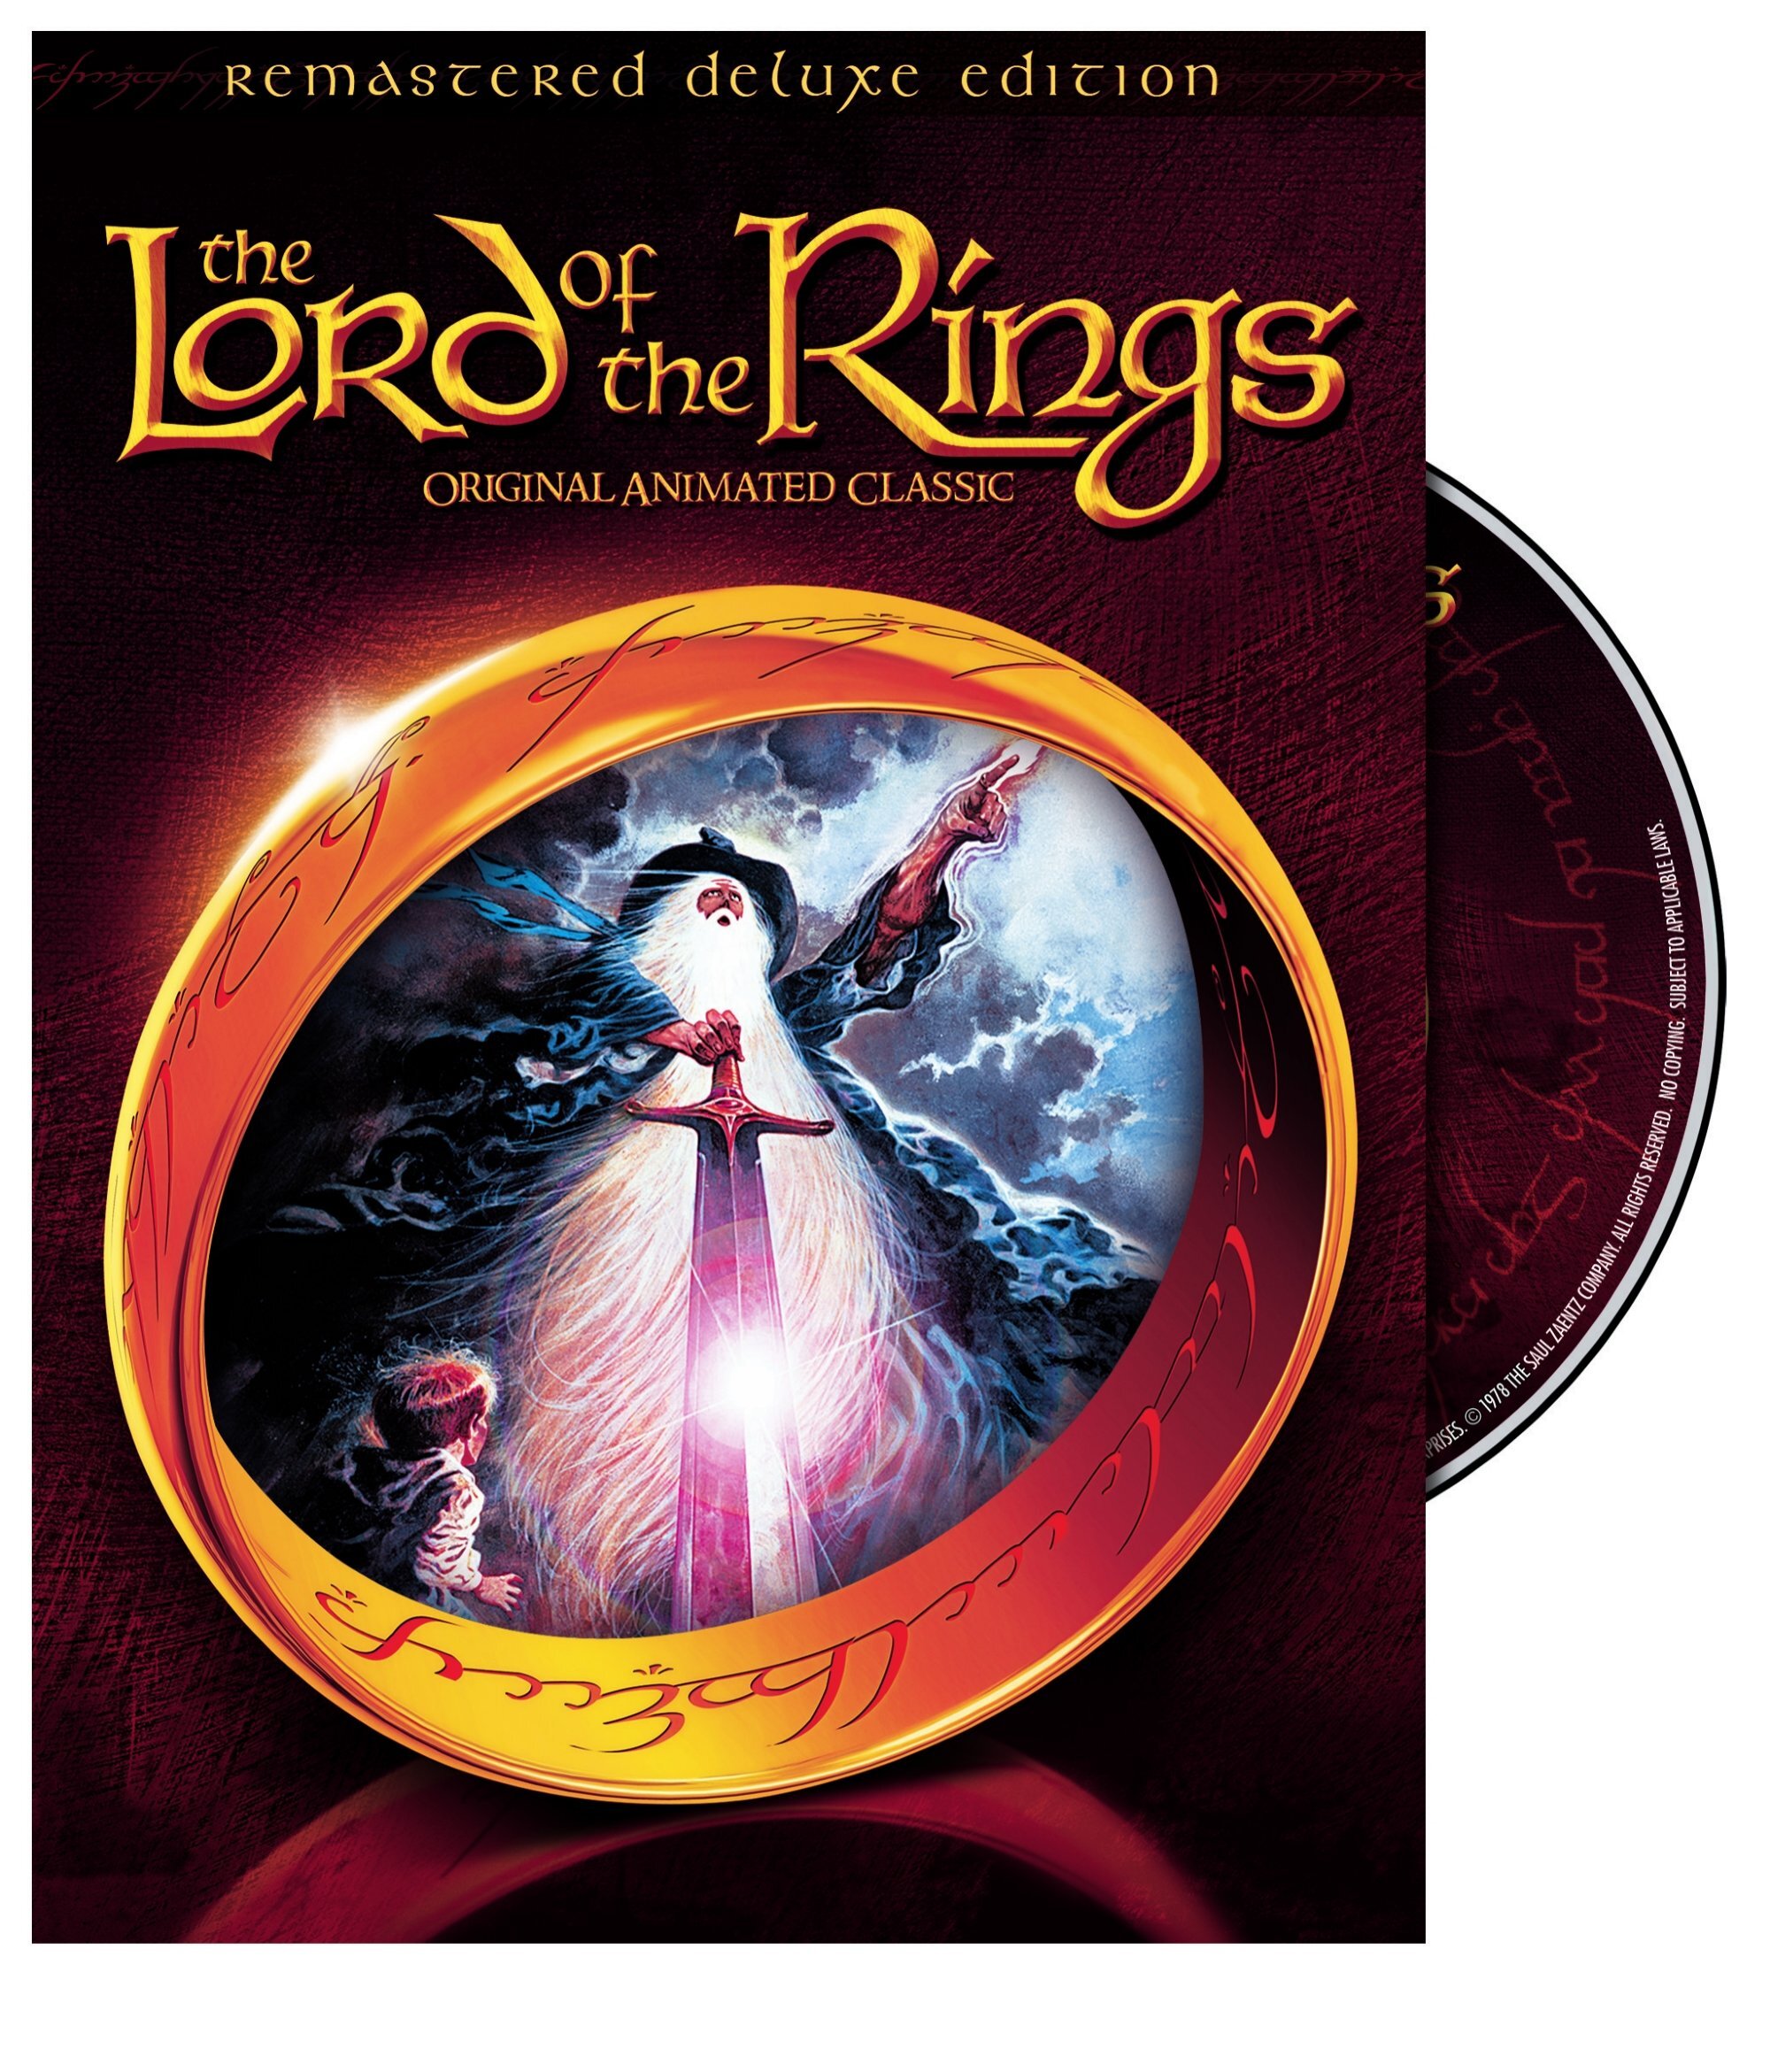 Lord Of The Rings: Animated Deluxe Edition (DVD Deluxe Edition) - DVD [ 1978 ]  - Animation Movies On DVD - Movies On GRUV